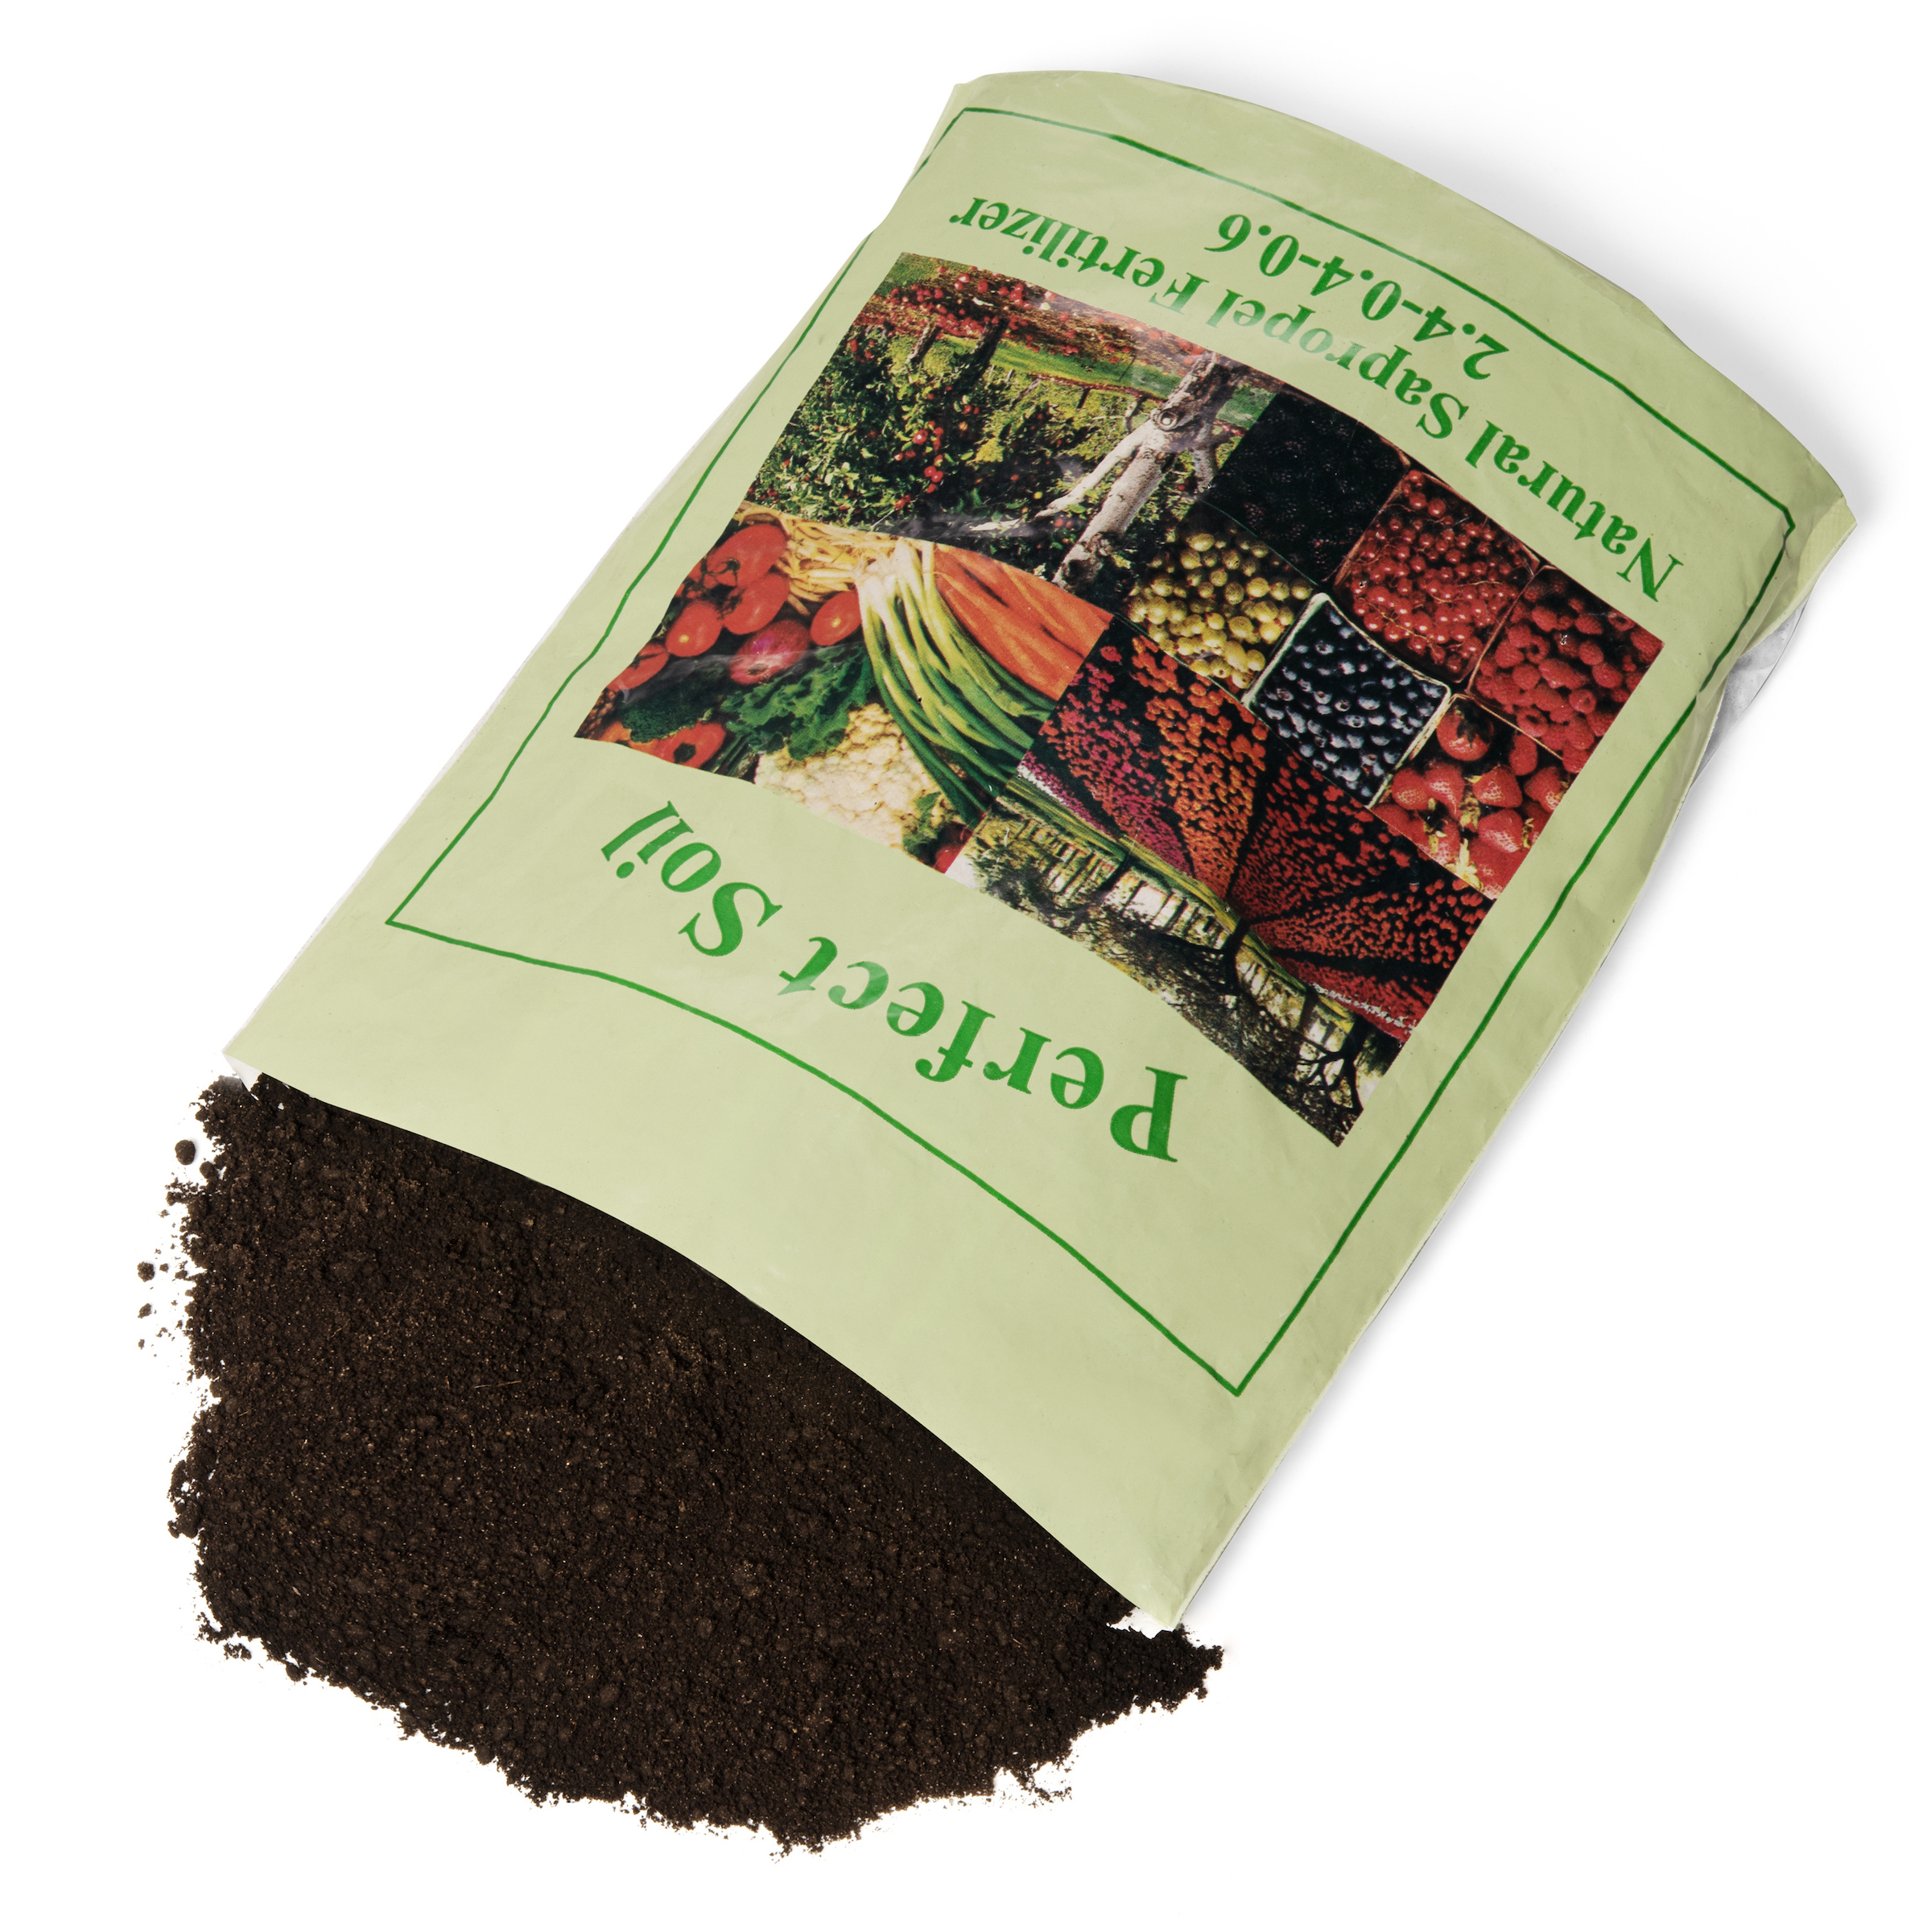 Perfect Soil Sapropel Organic Fertilizer for Vegetables and Plant Food - Grow a Healthier Garden and Protect Your Plants from Disease with Organic Garden Fertilizer for Indoor and Outdoor Plants - image 3 of 7